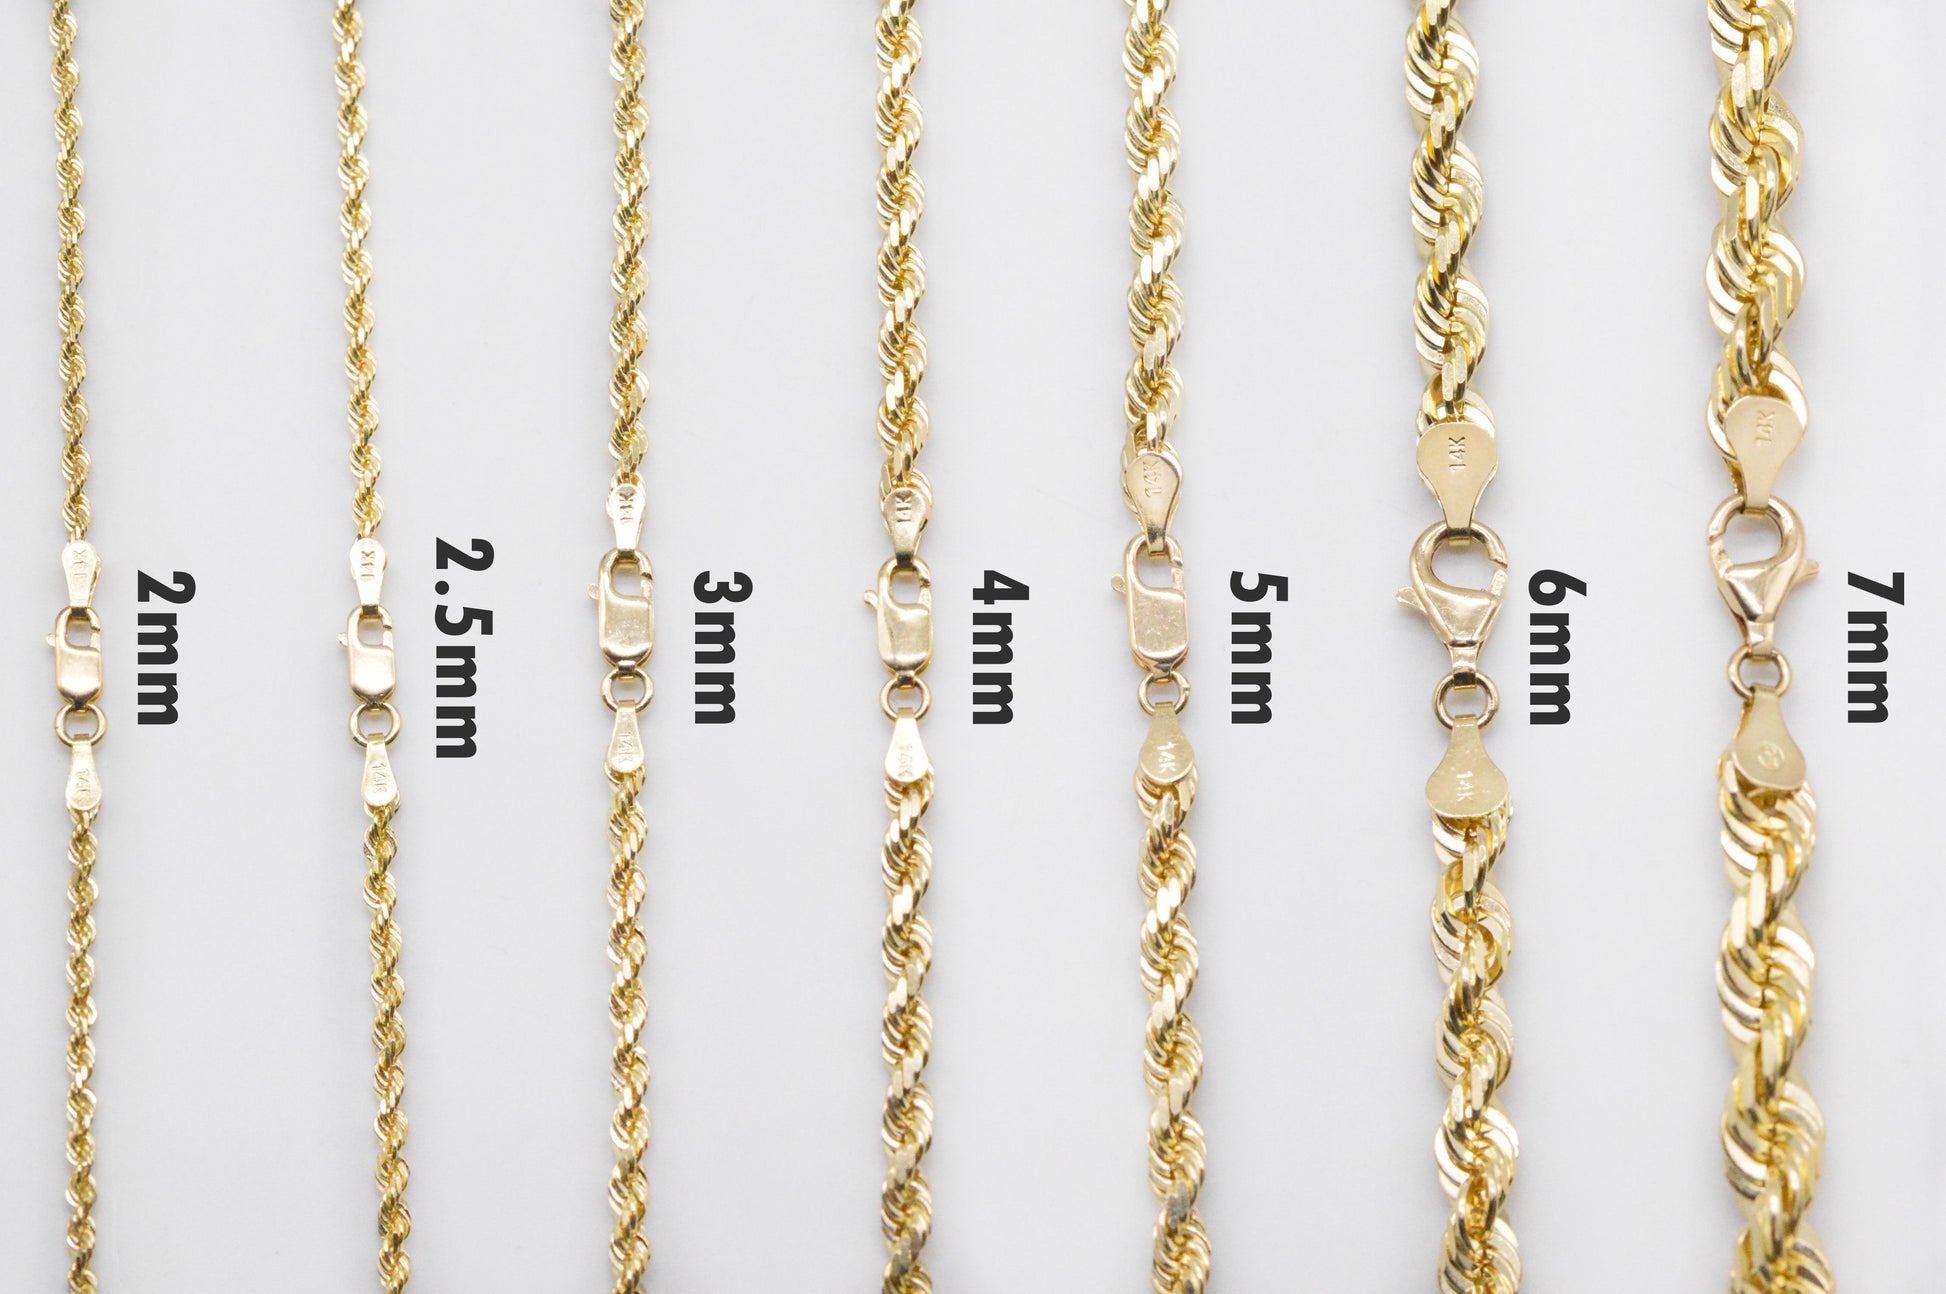 6mm Solid Gold Diamond Cut Rope Necklace Solid Gold Rope Chains